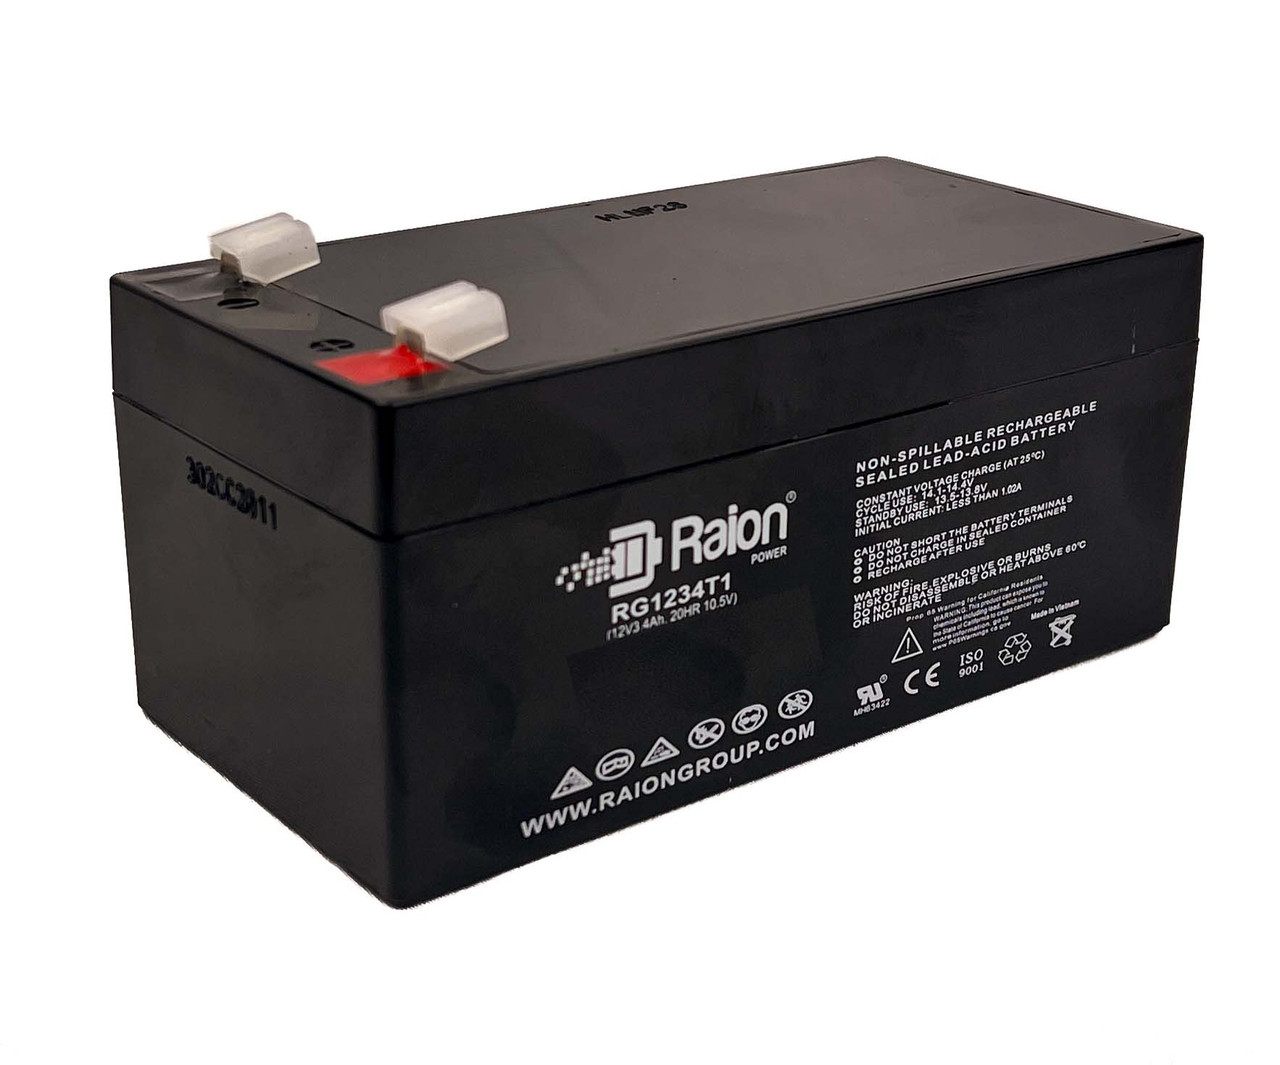 Raion Power 12V 3.4Ah Non-Spillable Replacement Battery for MaxPower NP3.5-12